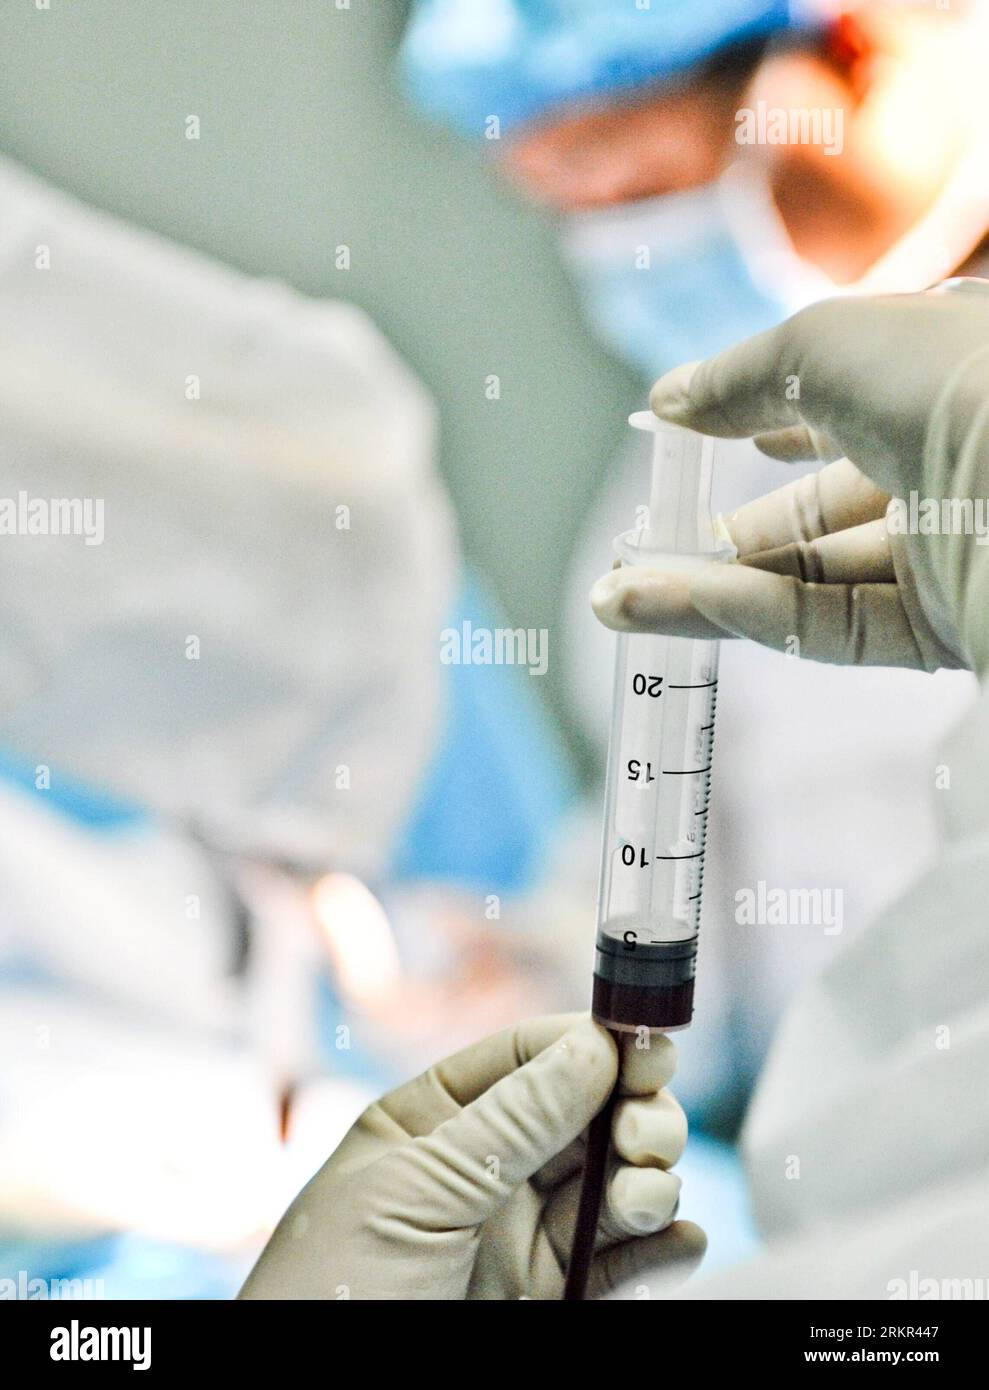 Bildnummer: 58115365  Datum: 18.06.2012  Copyright: imago/Xinhua (120618) -- CHONGQING, June 18, 2012 (Xinhua) -- A doctor injects stem cells withdrawn from the prisoner father surnamed Gao into a storage container at Xinqiao Hospital in Chongqing, southwest China, June 15, 2012. A family is facing an anxious wait to see whether a bone marrow transplant, made possible by the incarcerated father s rare trans-provincial prison transfer, has saved their son s life. PUBLICATIONxNOTxINxCHN Gesellschaft Fotostory Leukämie Medizin Knochenmarkspende Stammzellen Stammzellentherapie Spende xjh x2x 2012 Stock Photo